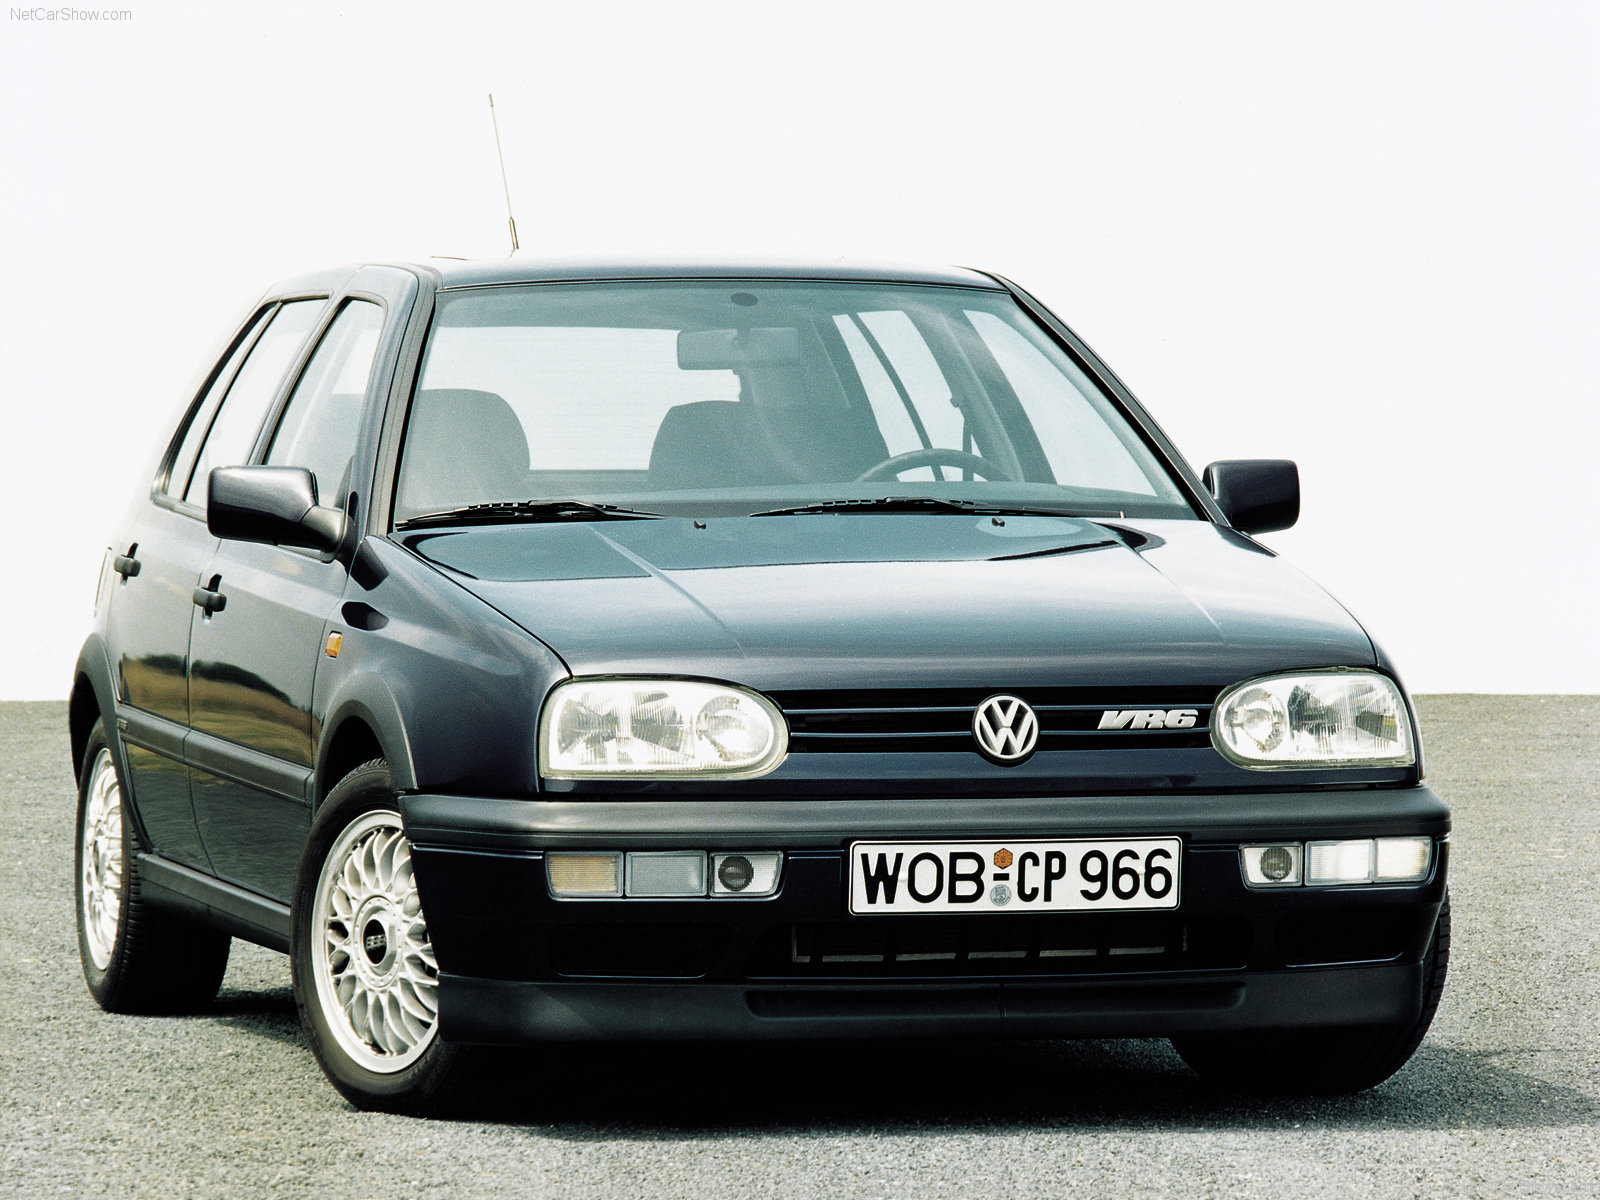 VW Golf 3 technical details, history, photos on Better